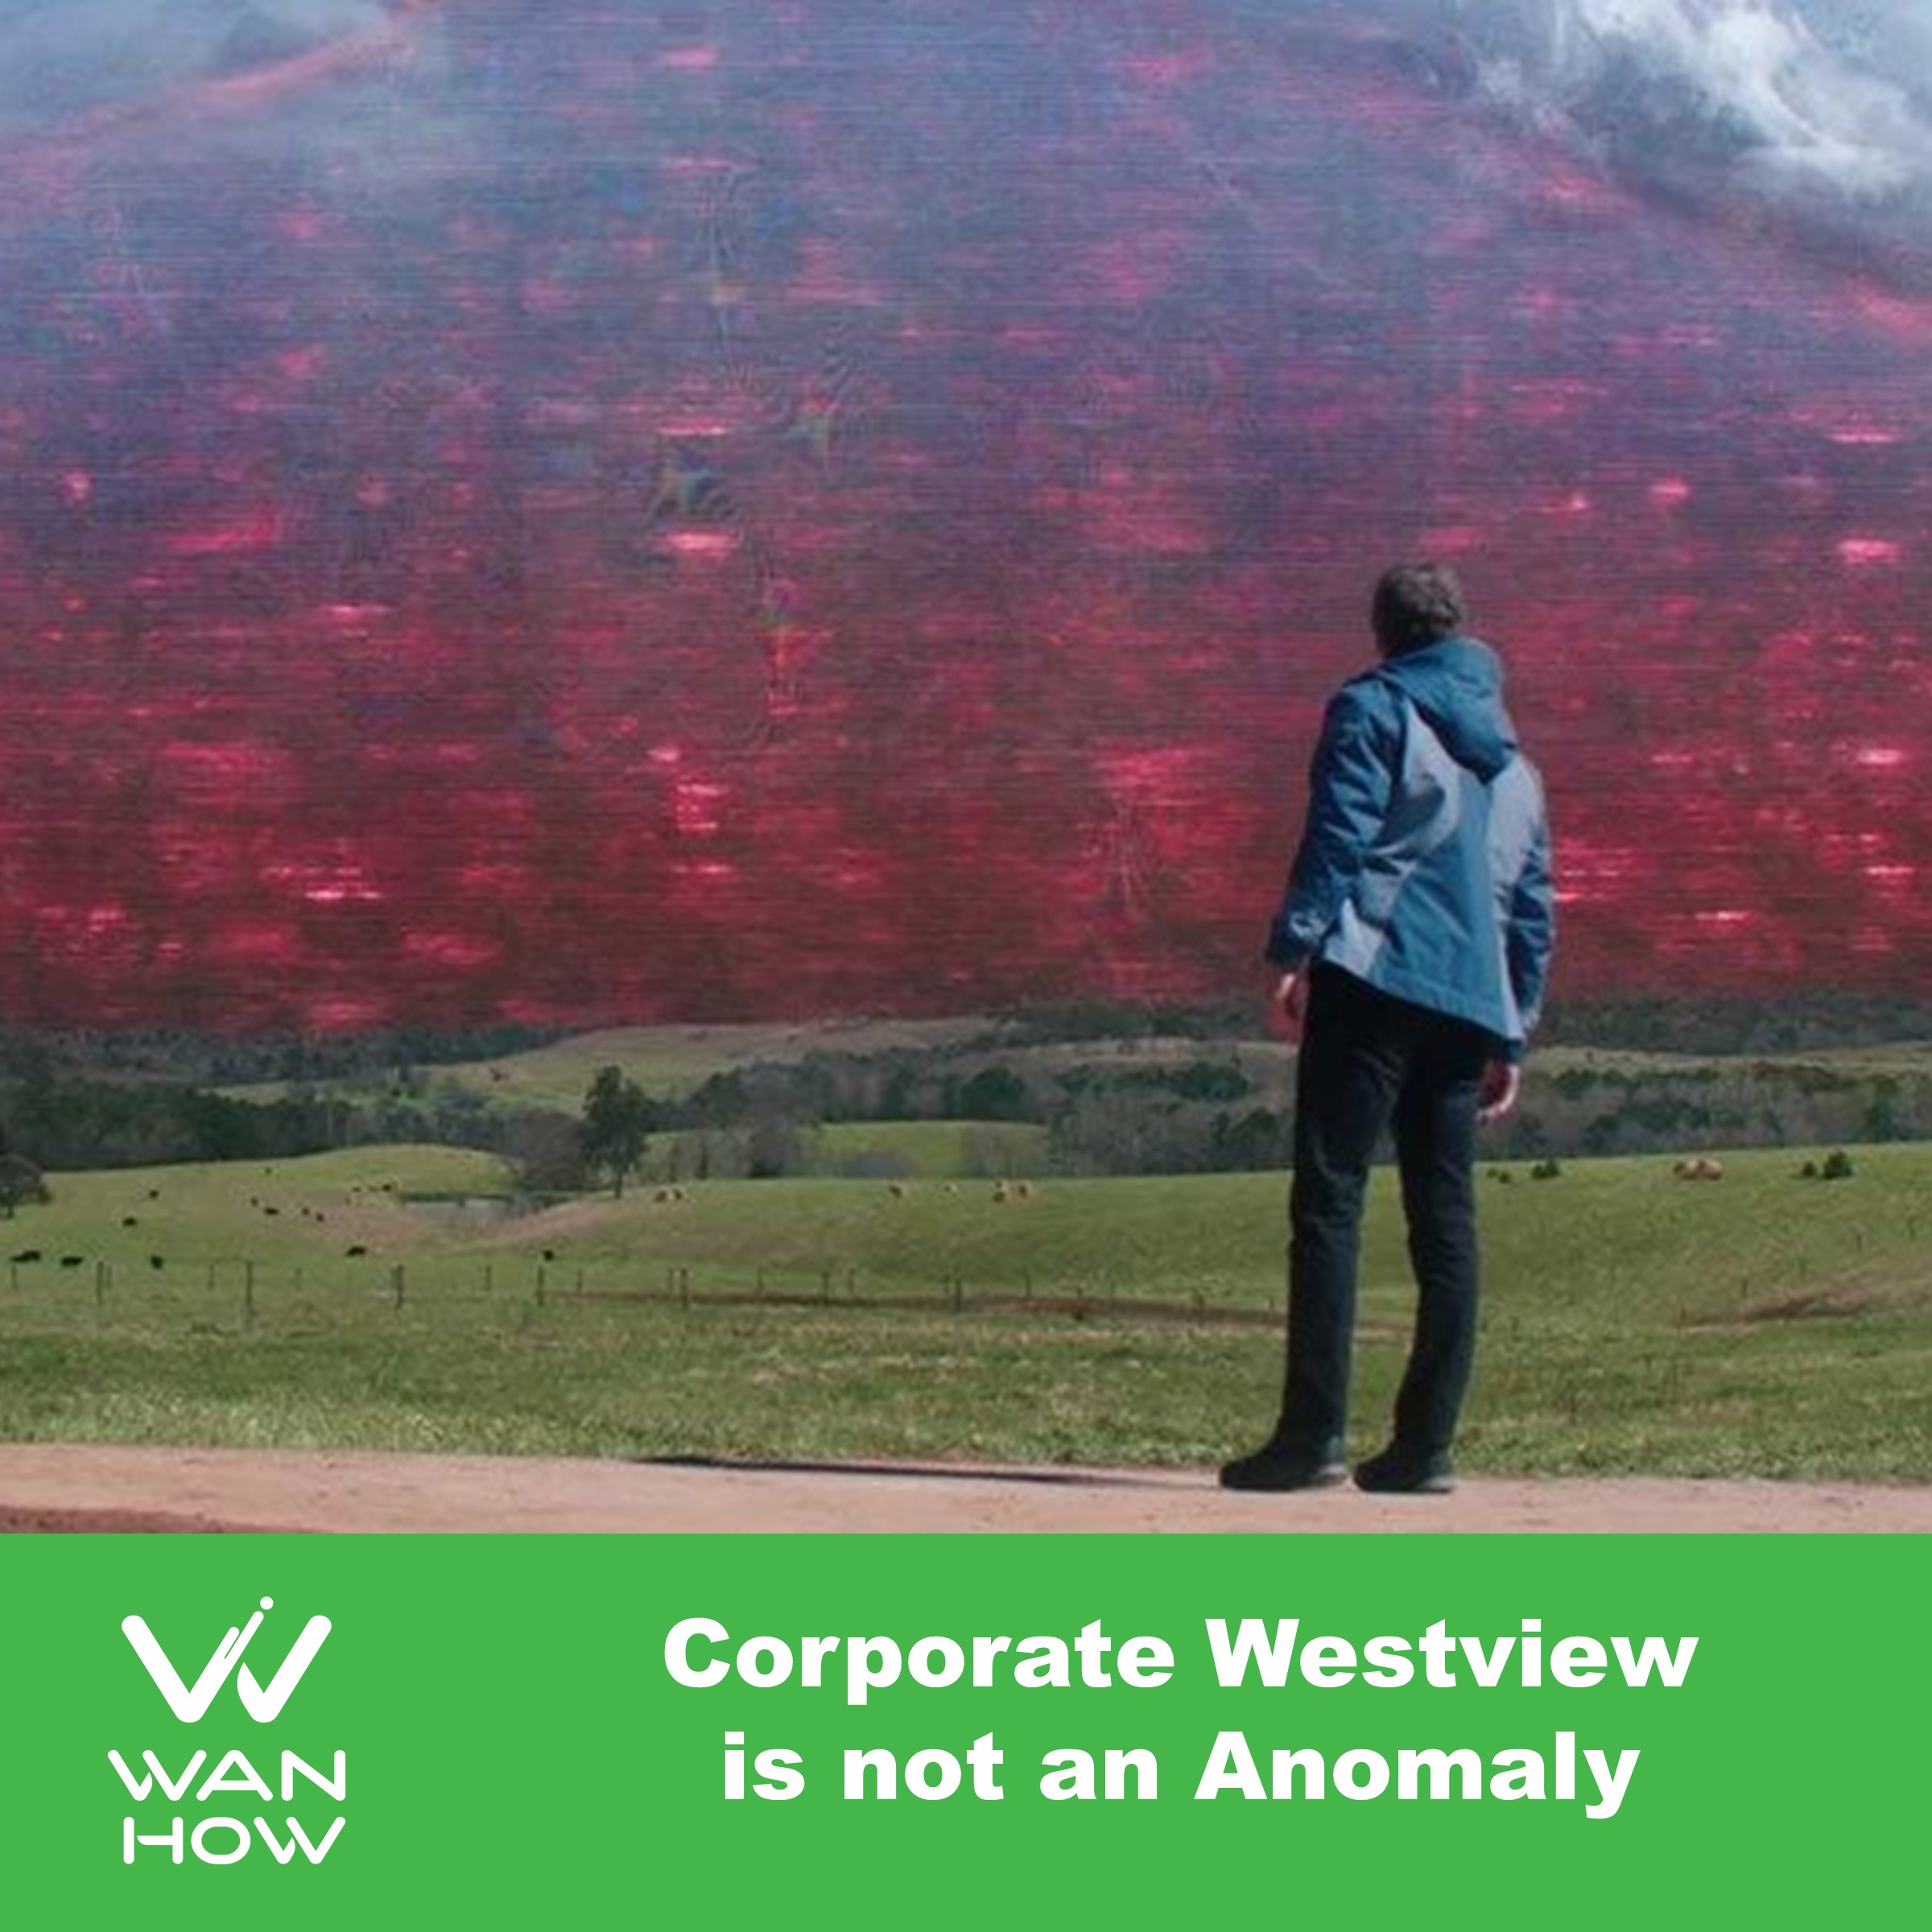 Corporate Westview is not an Anomaly